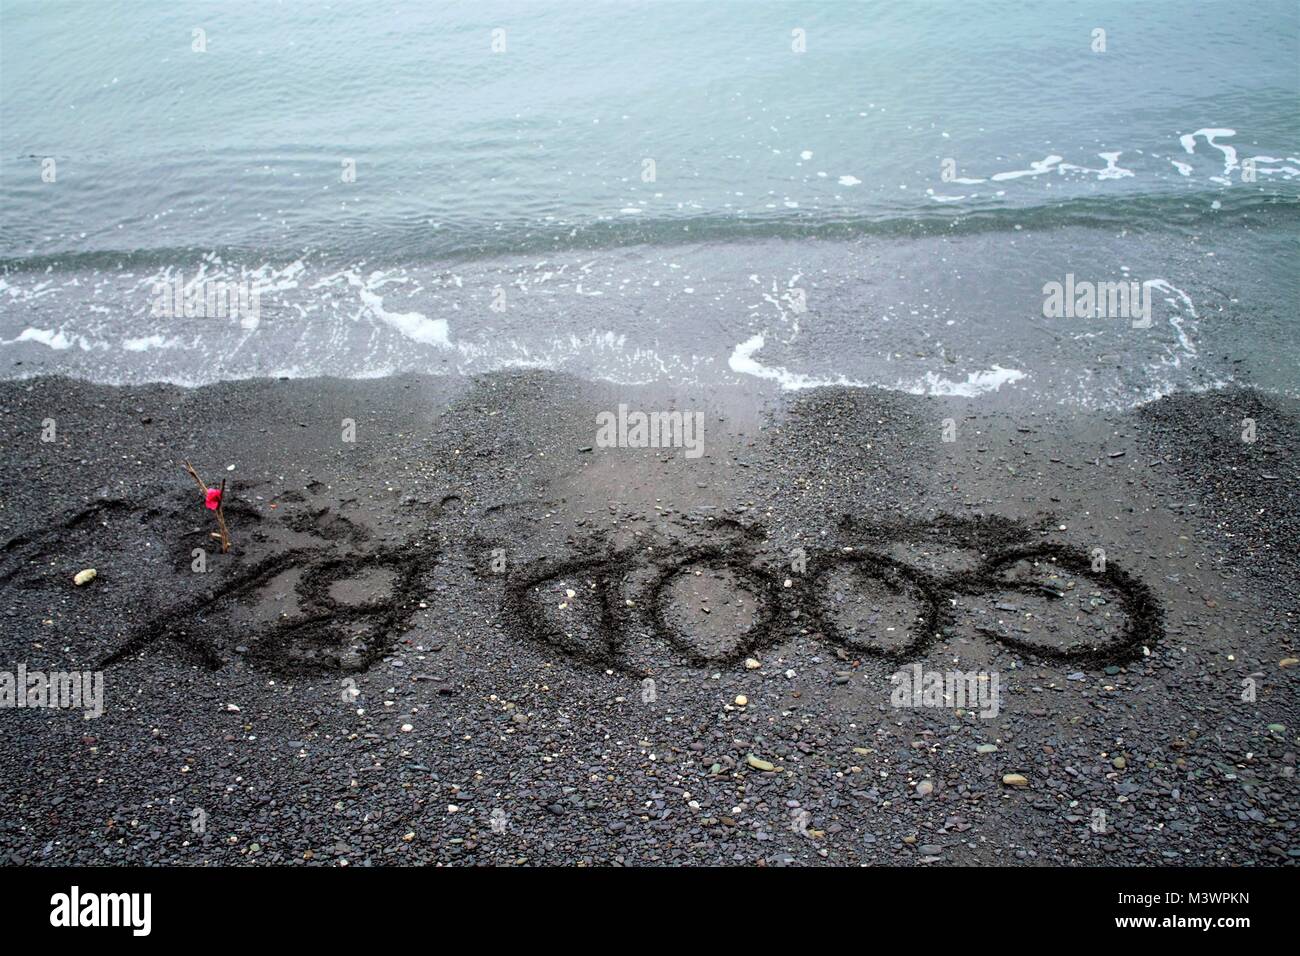 Goodbye message written in the shingle on the beach. Stock Photo